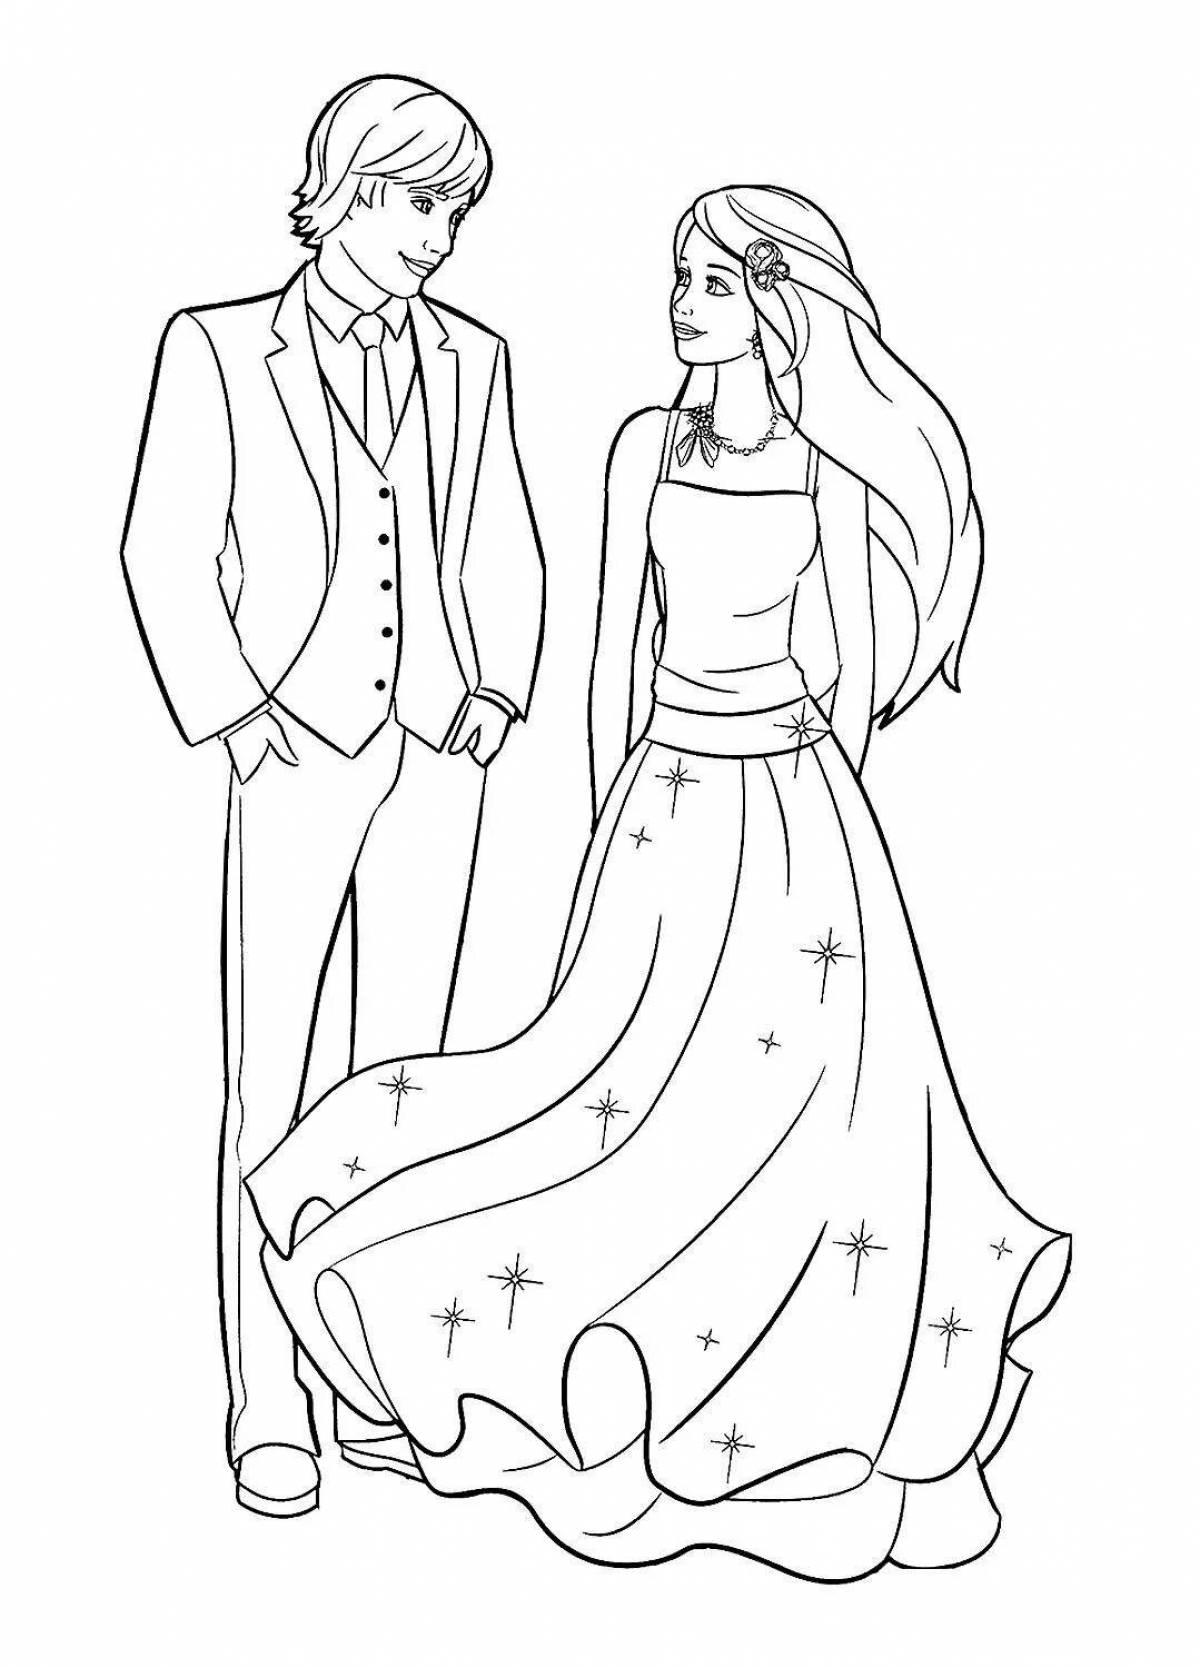 Glowing wife and husband coloring page